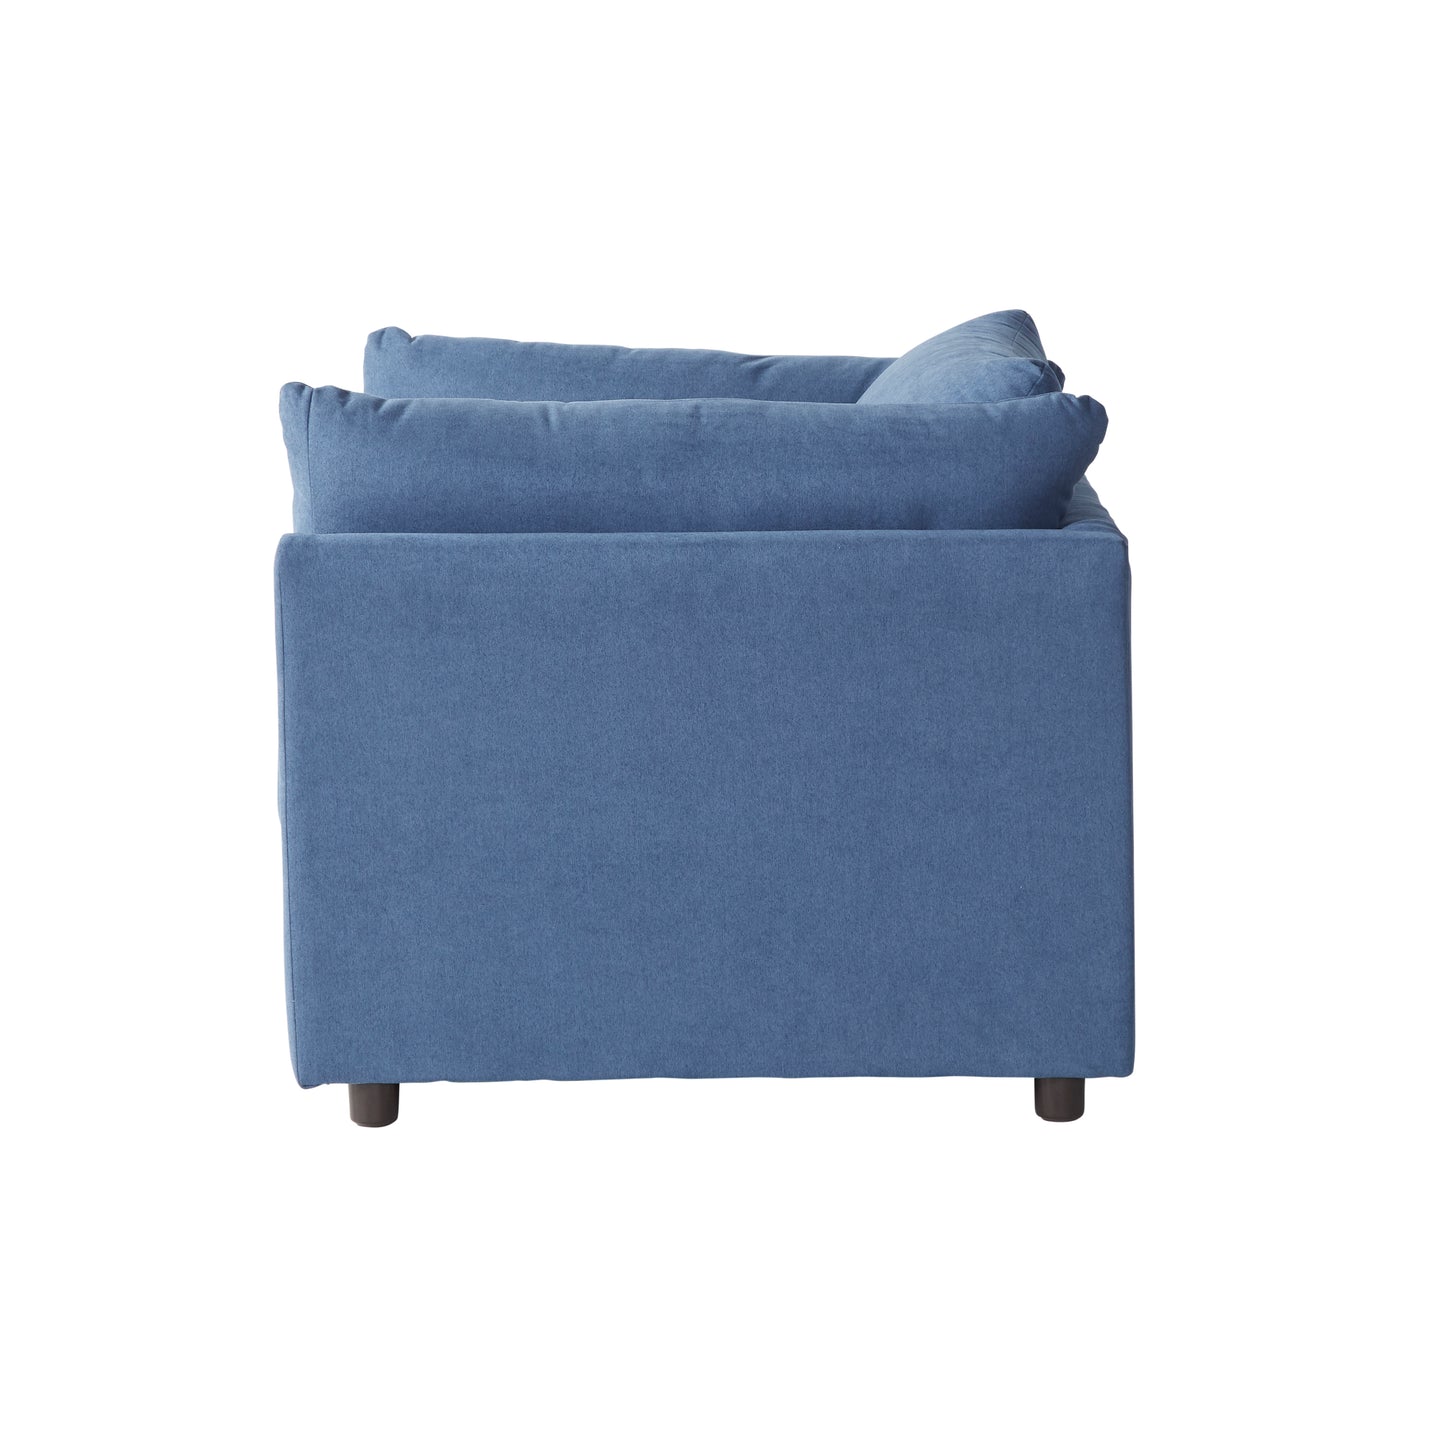 Roundhill Furniture Enda Pillow Back Fabric Sofa and Cuddler Chair Living Room Collection, Image Navy